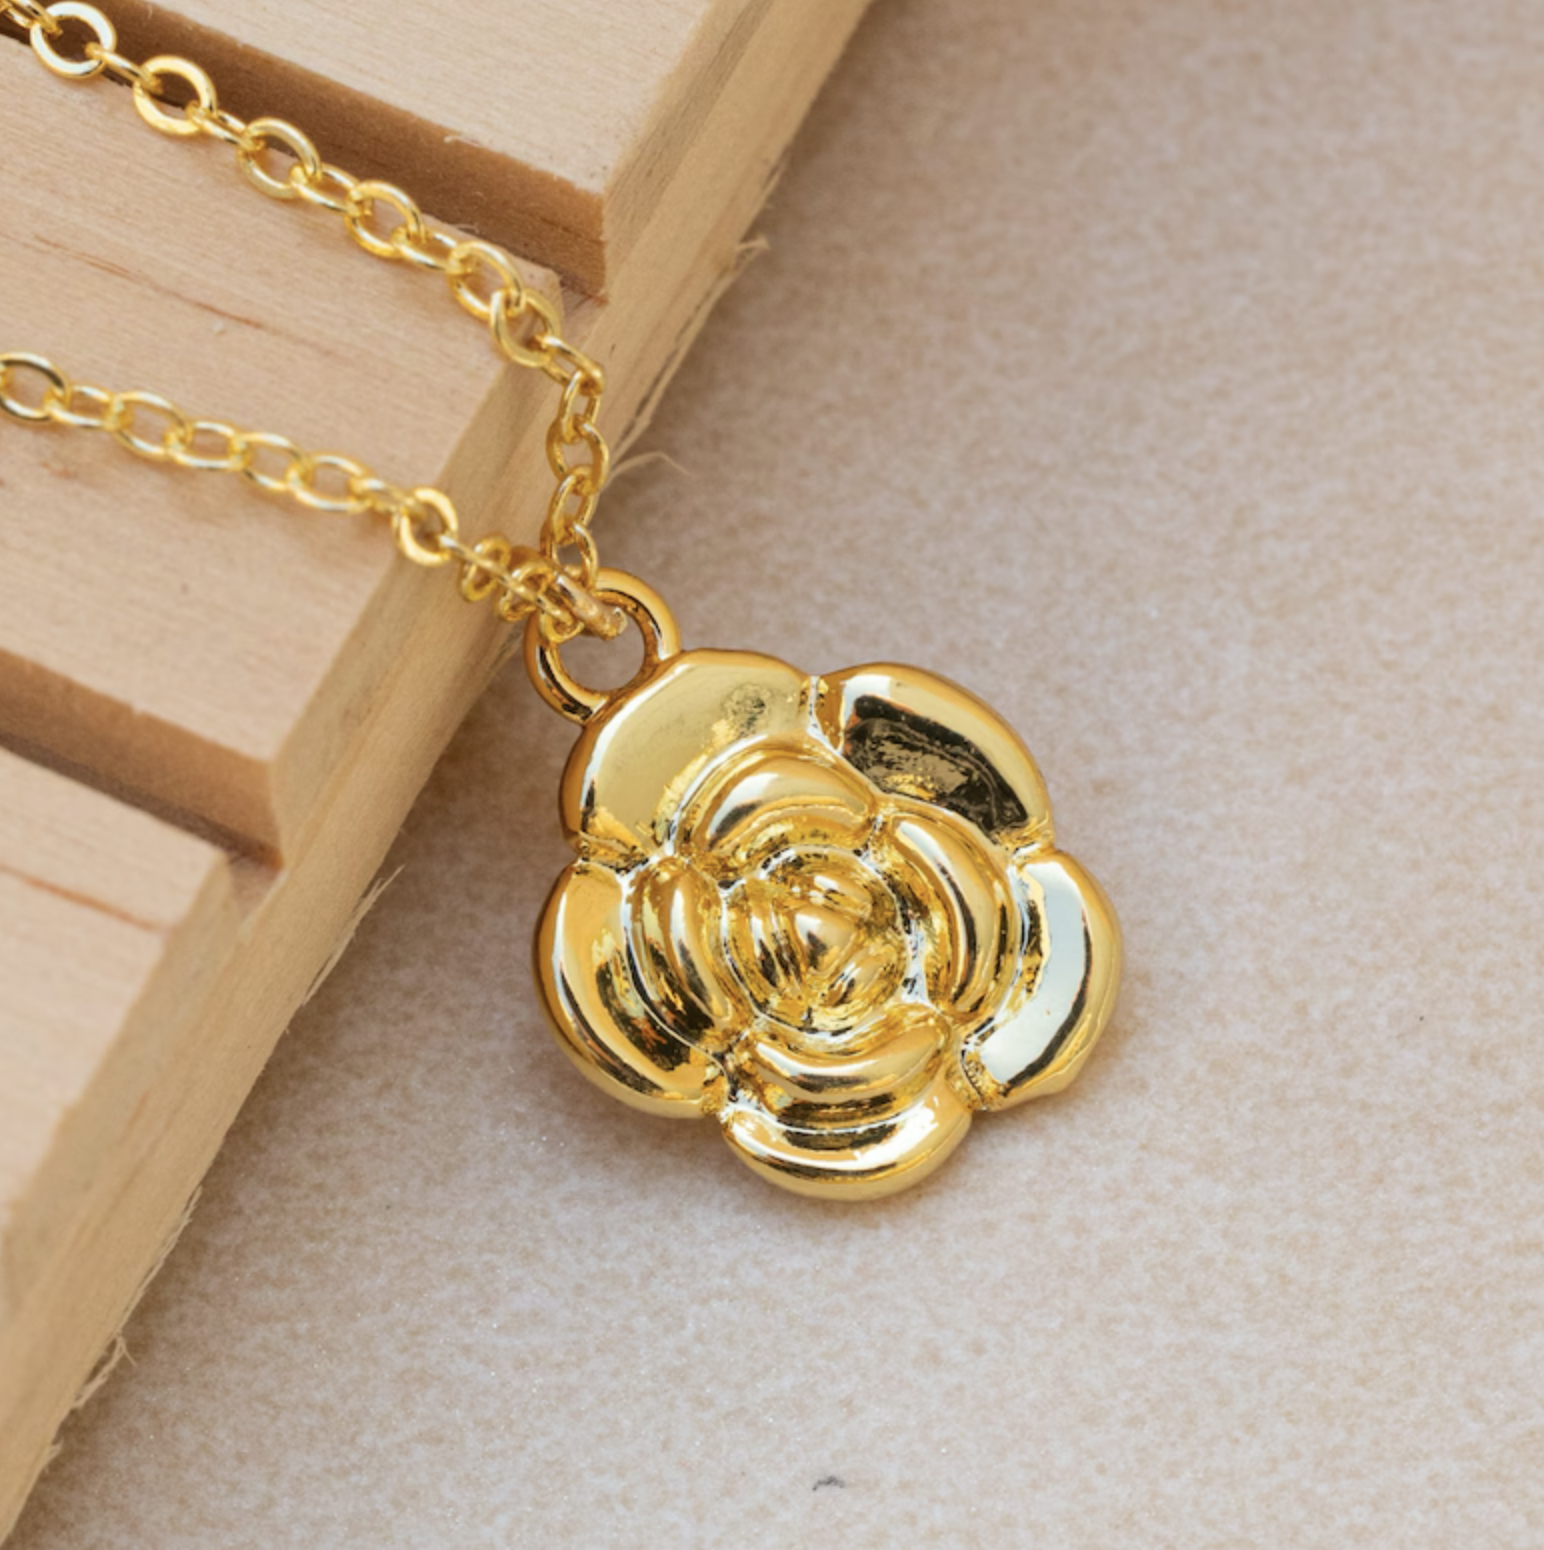 Gold-tone floral pendant on a chain displayed